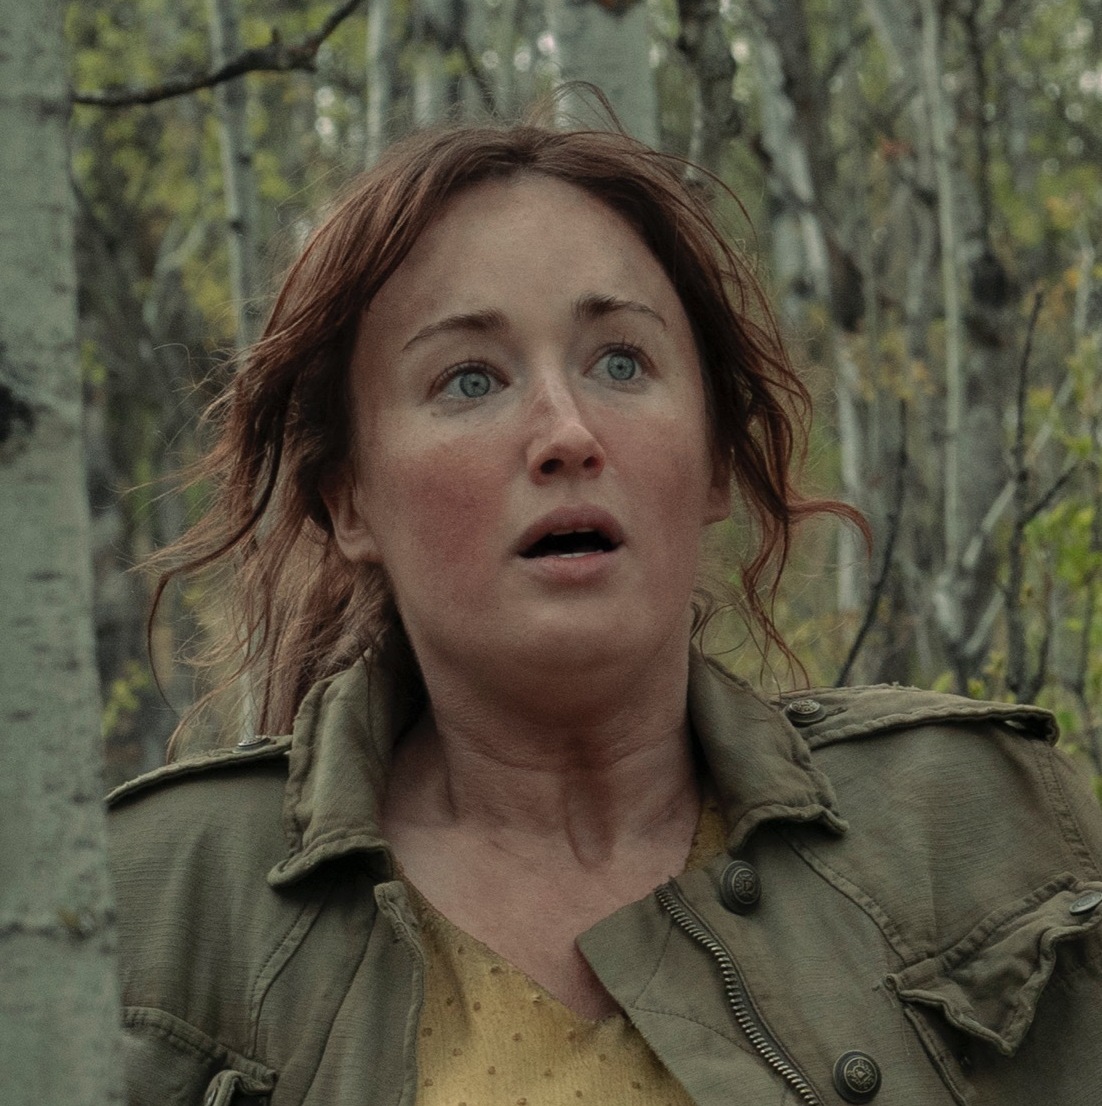 Ashley Johnson who plays Ellie in The Last of Us has started a